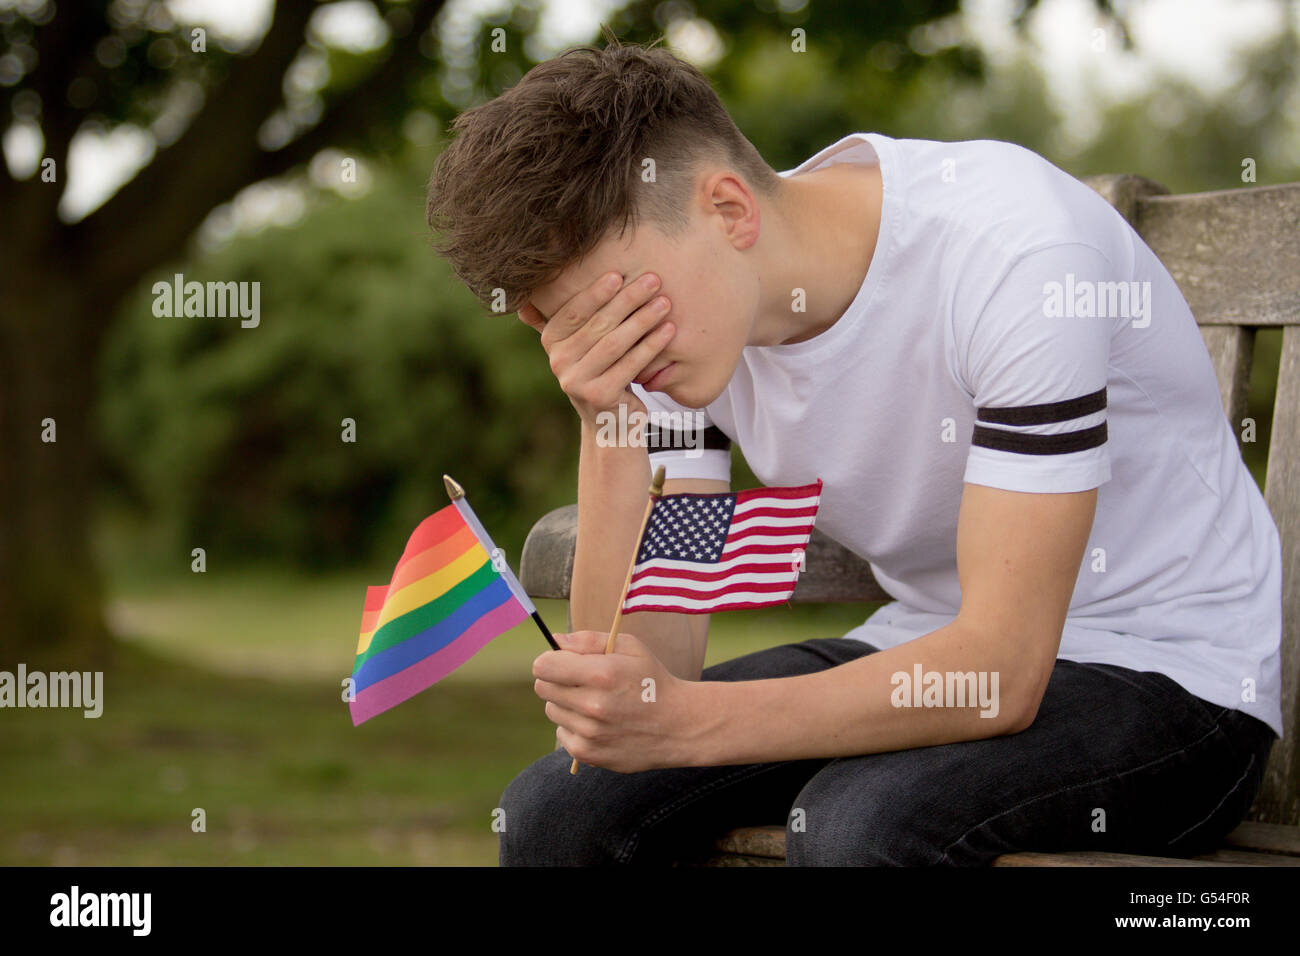 Depressed teenage boy with United States Flag and a Pride flag Stock Photo